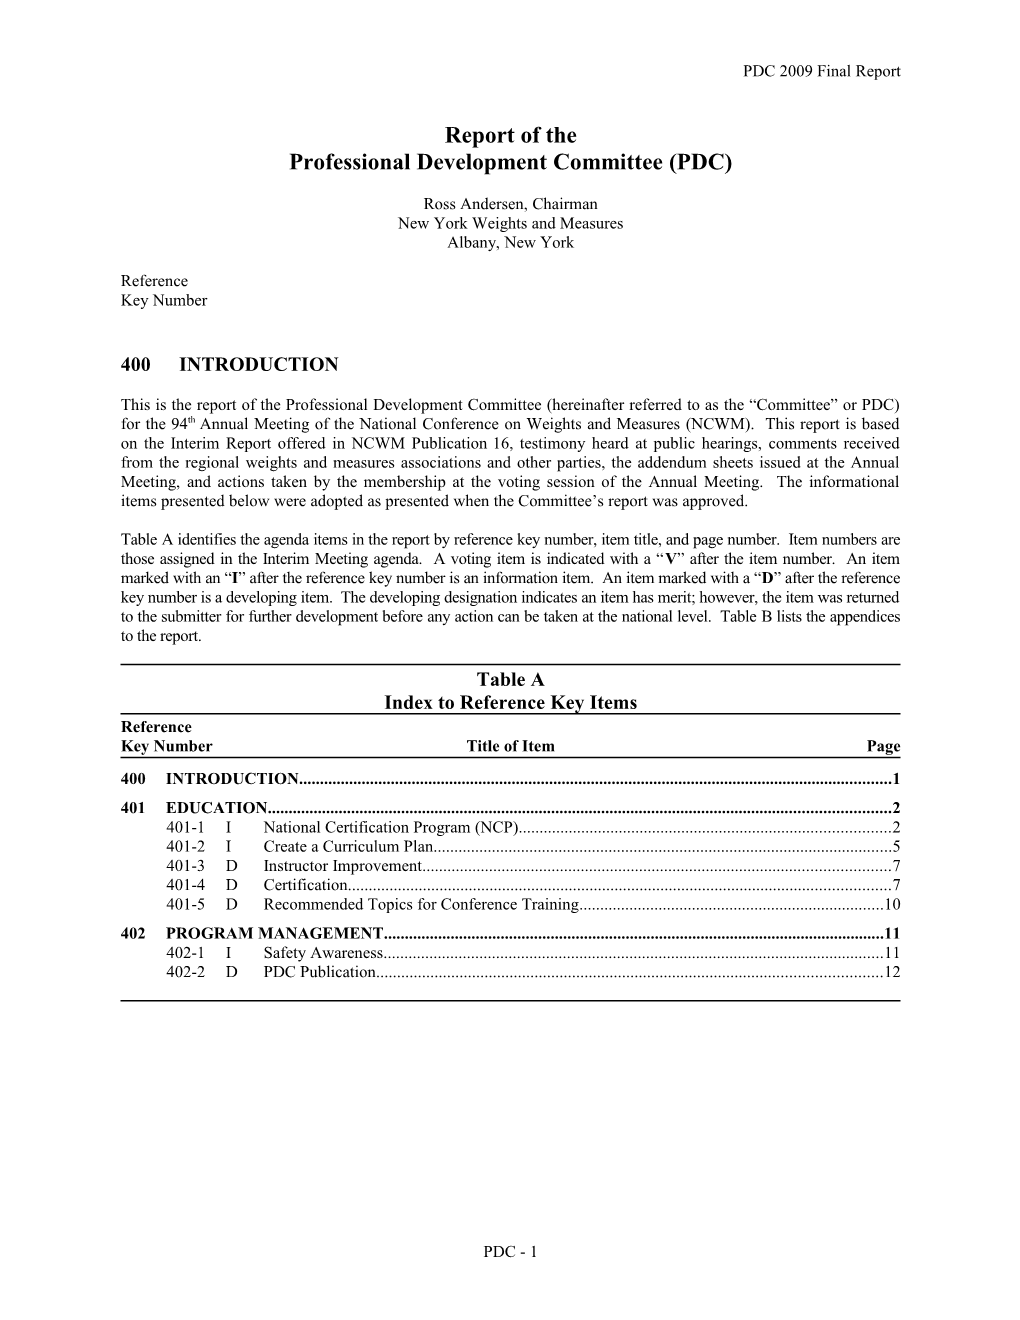 Report of the Professional Development Committee